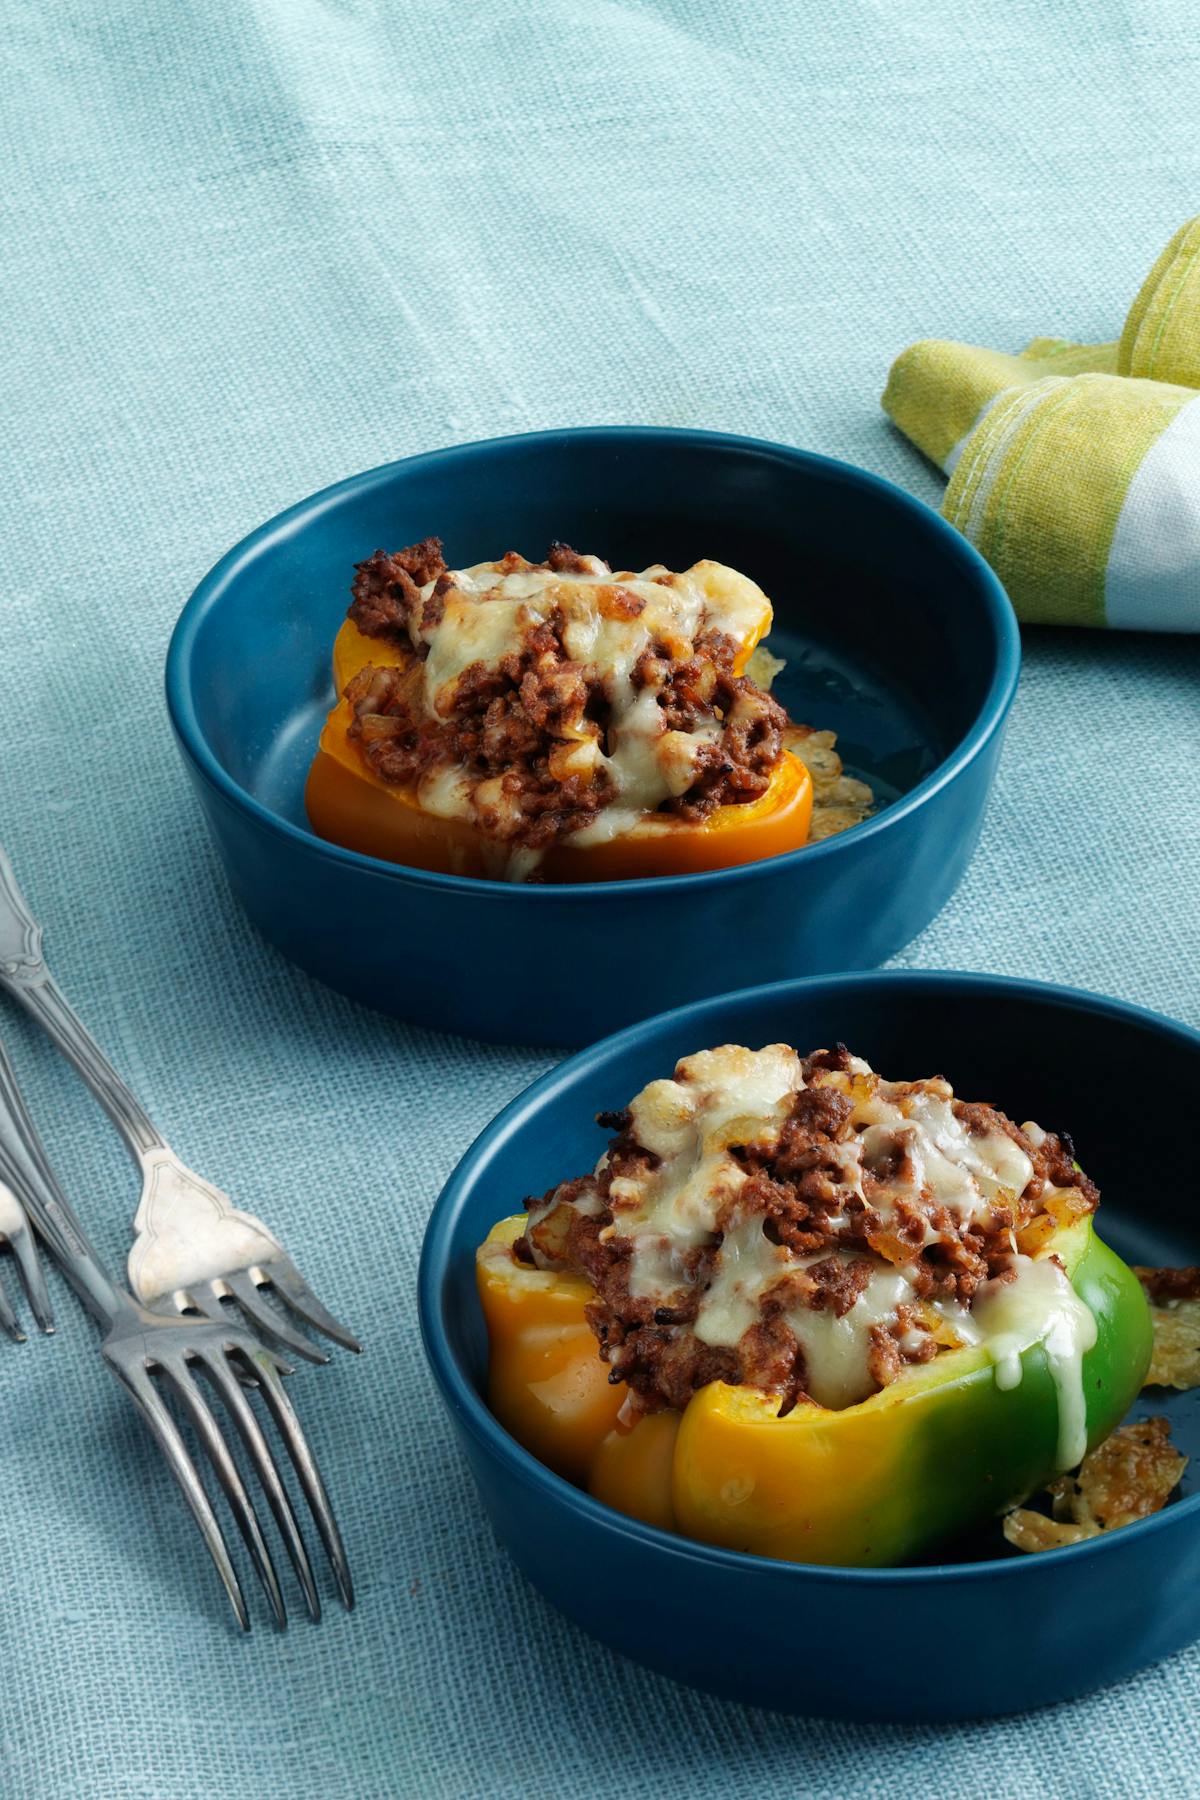 Stuffed peppers with ground beef and cheese